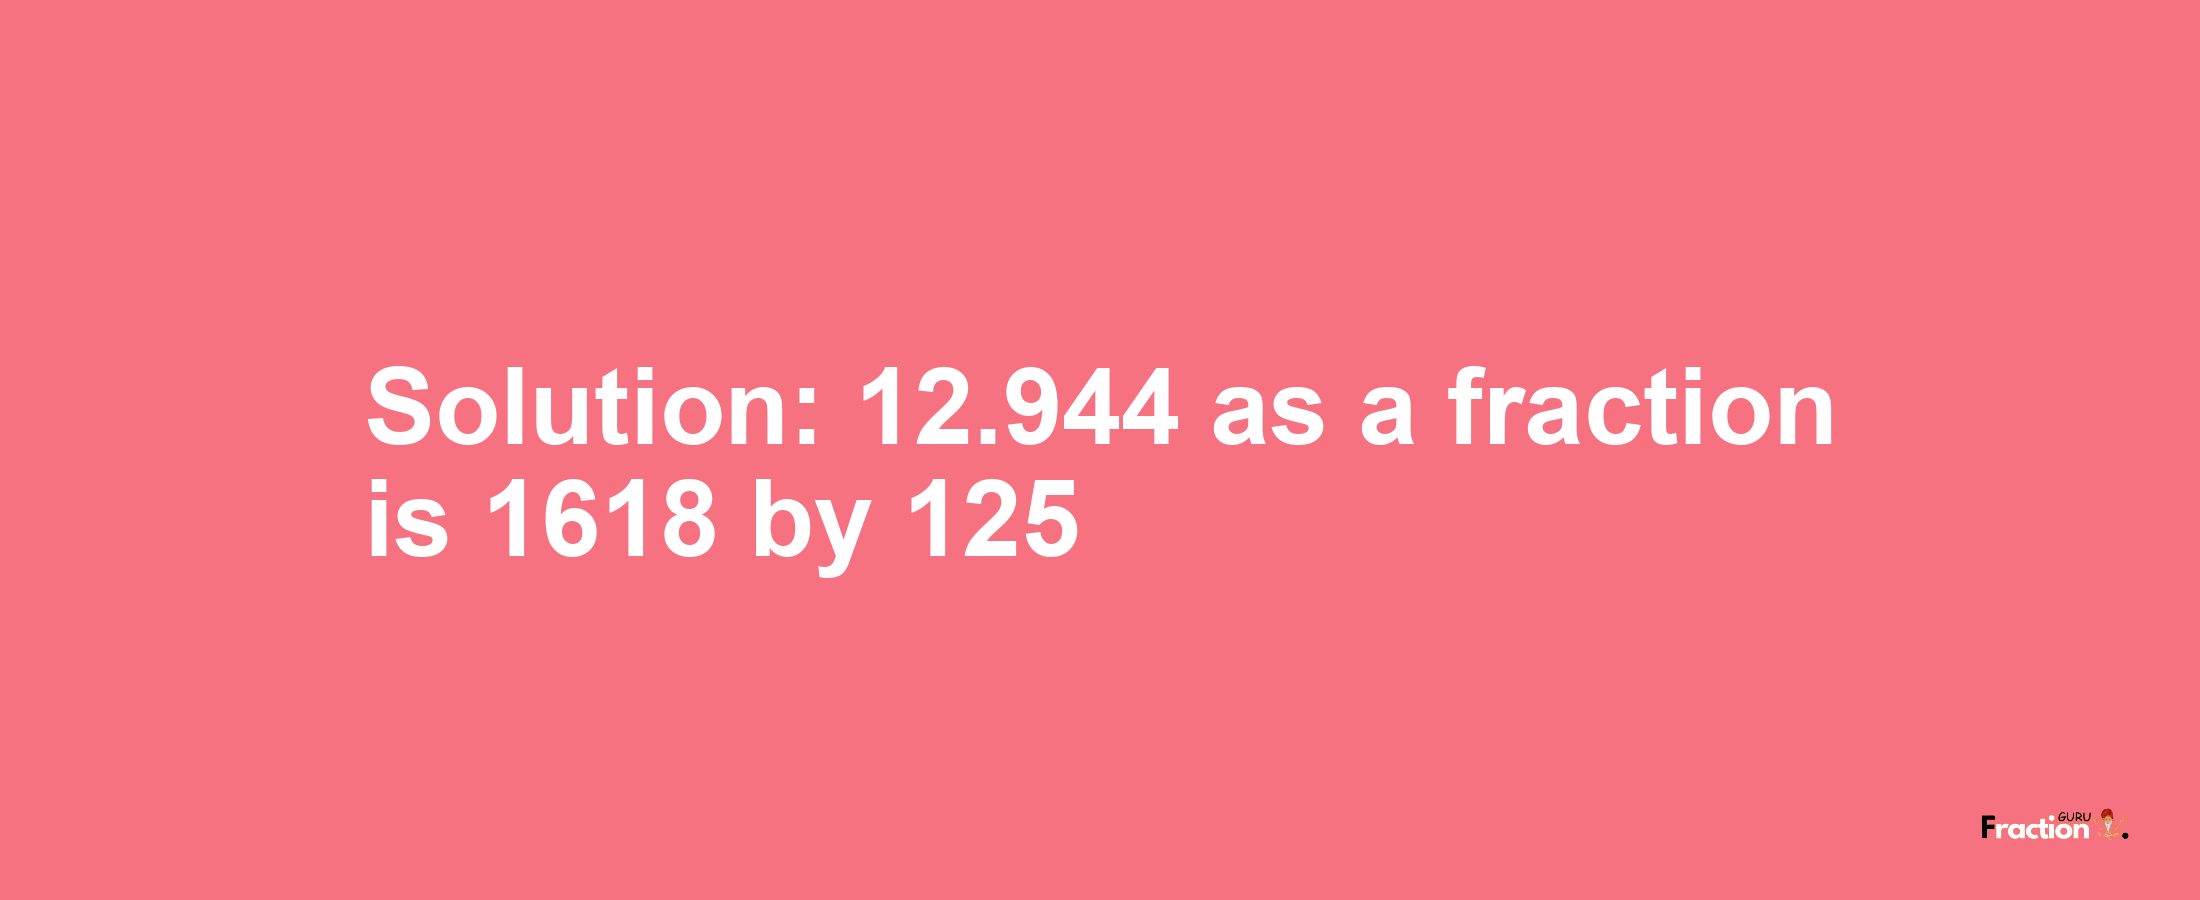 Solution:12.944 as a fraction is 1618/125